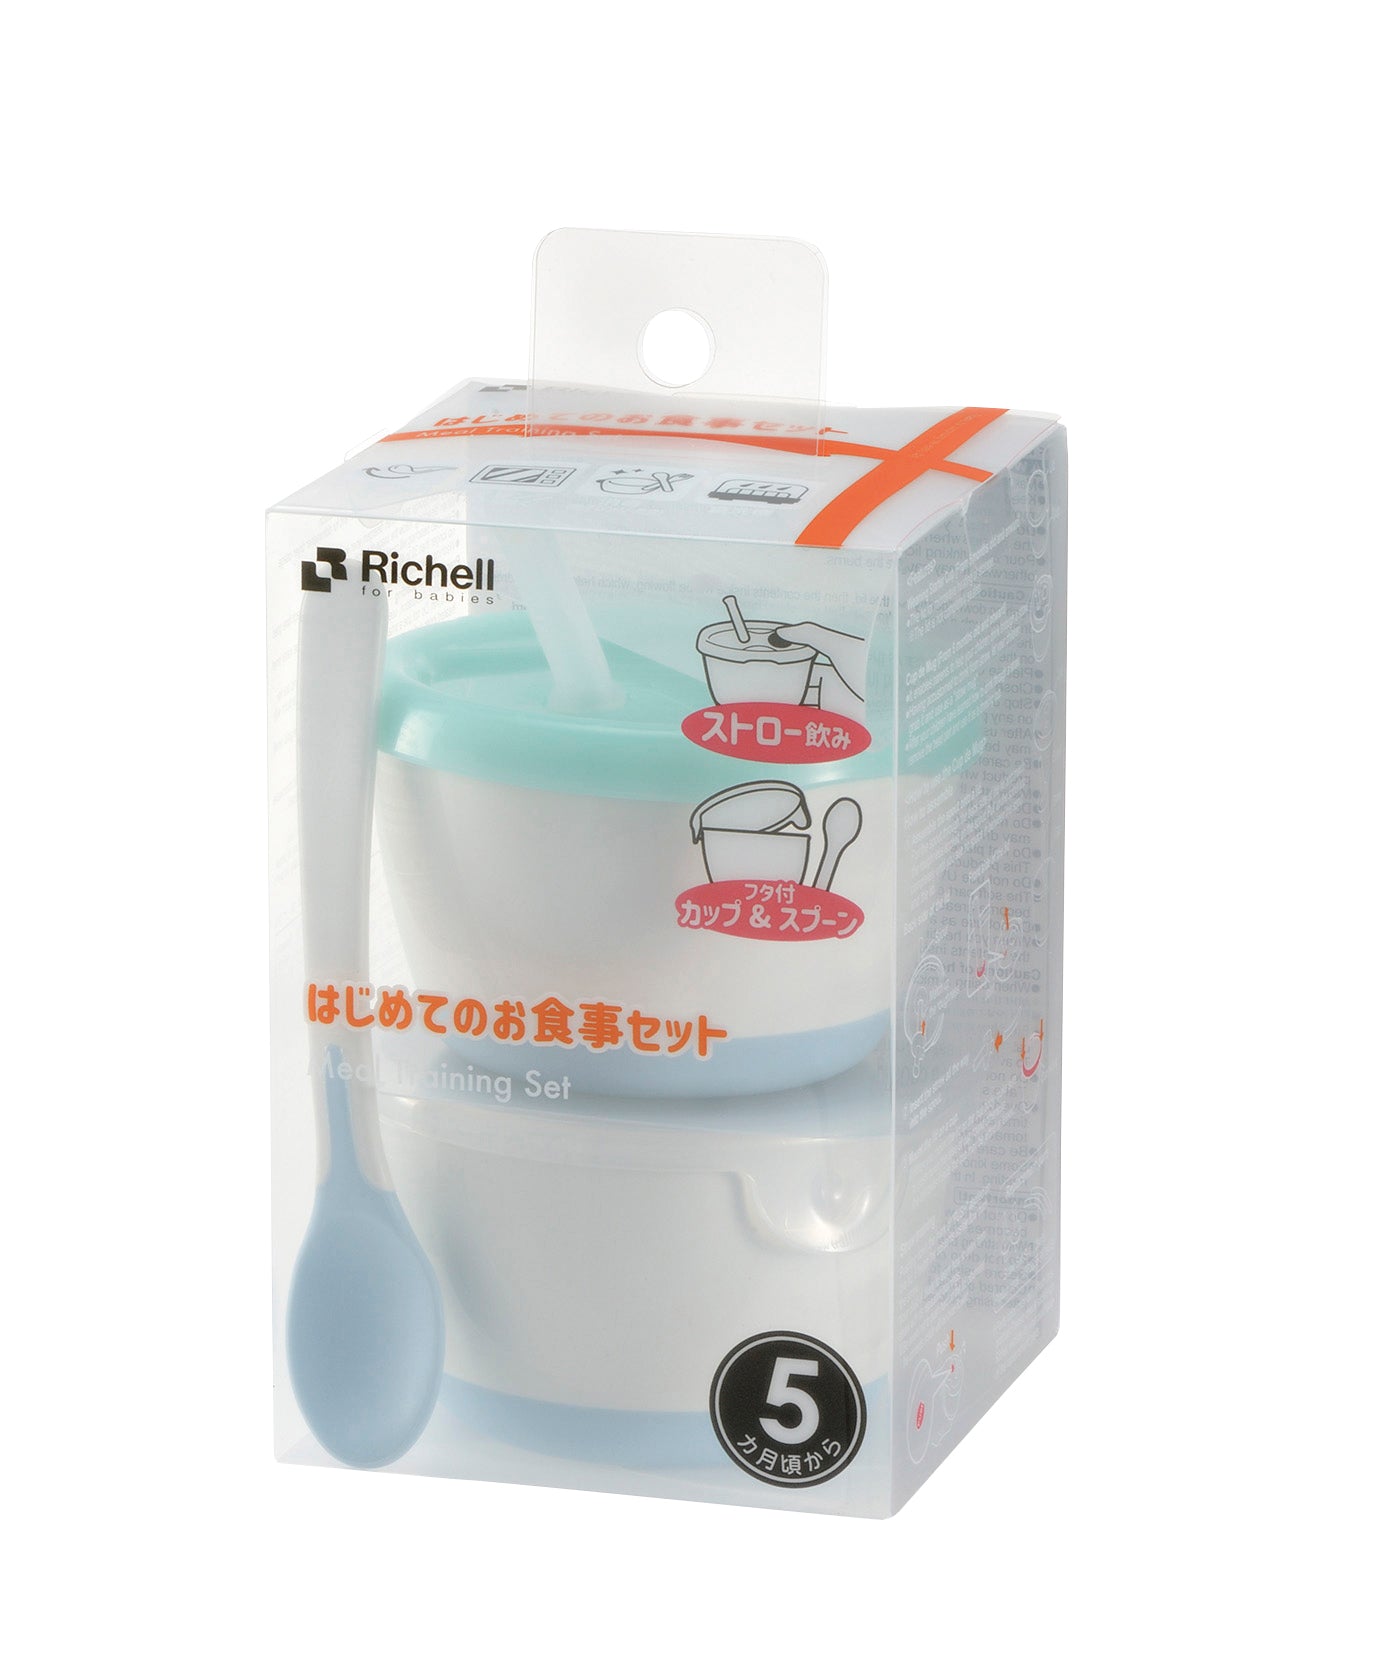 Richell Meal Training Set